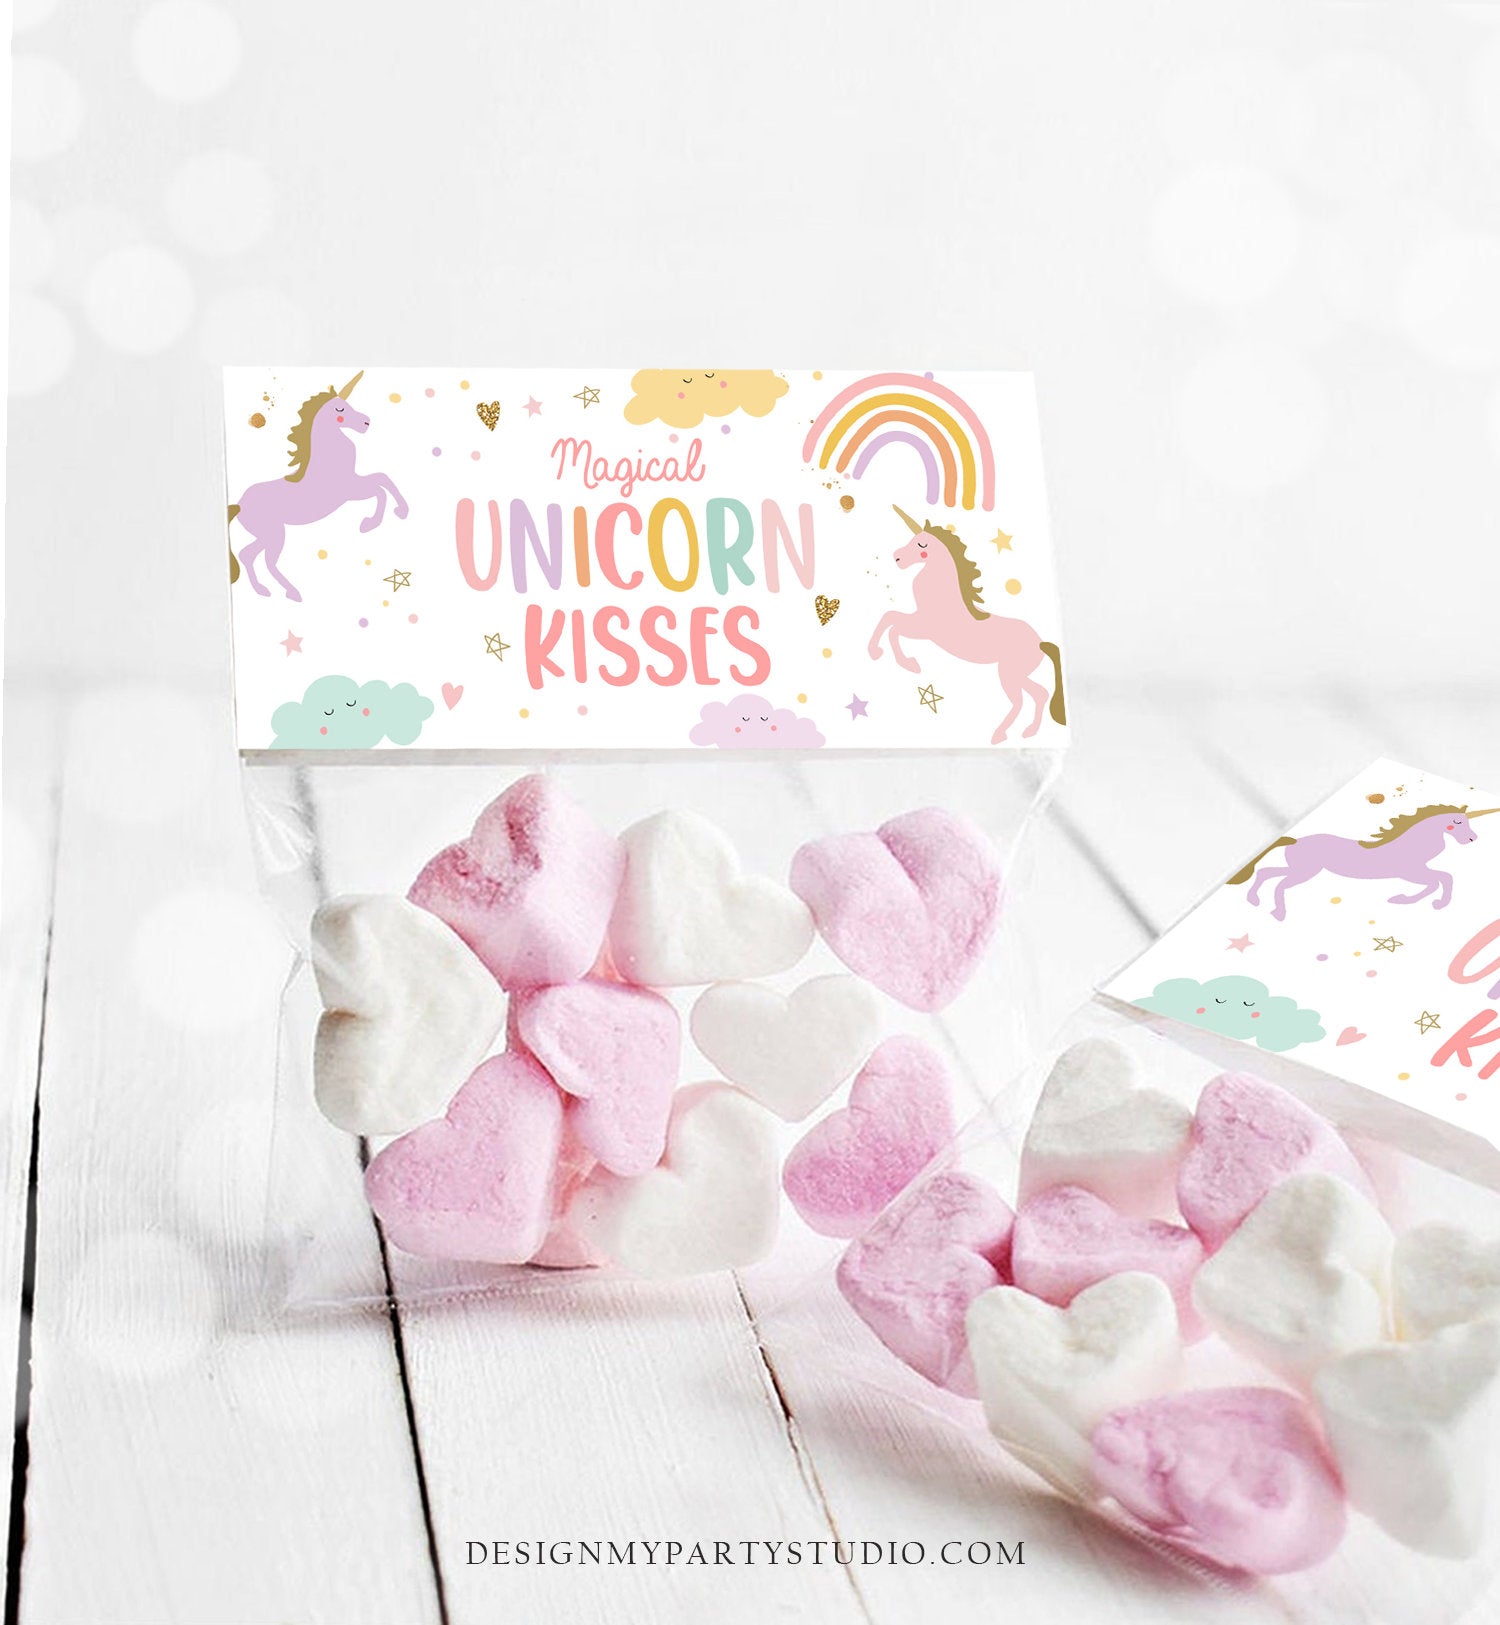 Printable Treat Bag toppers Unicorn Birthday Party Unicorn Kisses Label Unicorn Party Favors Pastel Instant Download DIGITAL PRINTABLE 0426